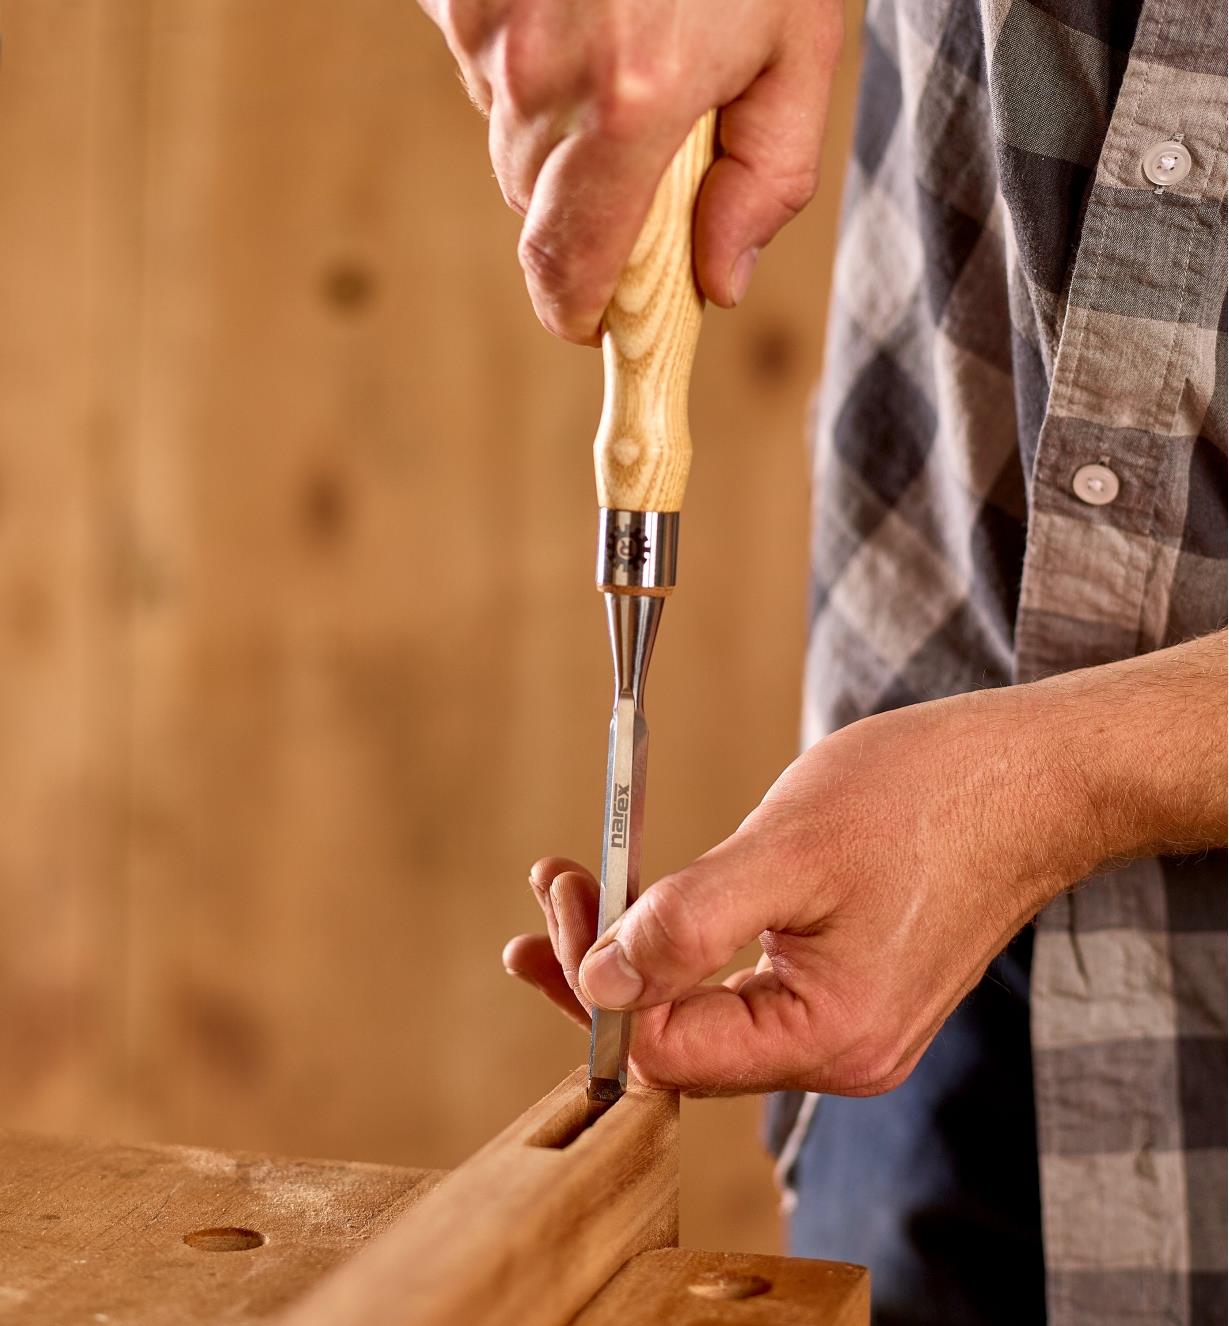 A woodworker uses a 3/8" Narex Richter chisel to smooth the walls of a mortise